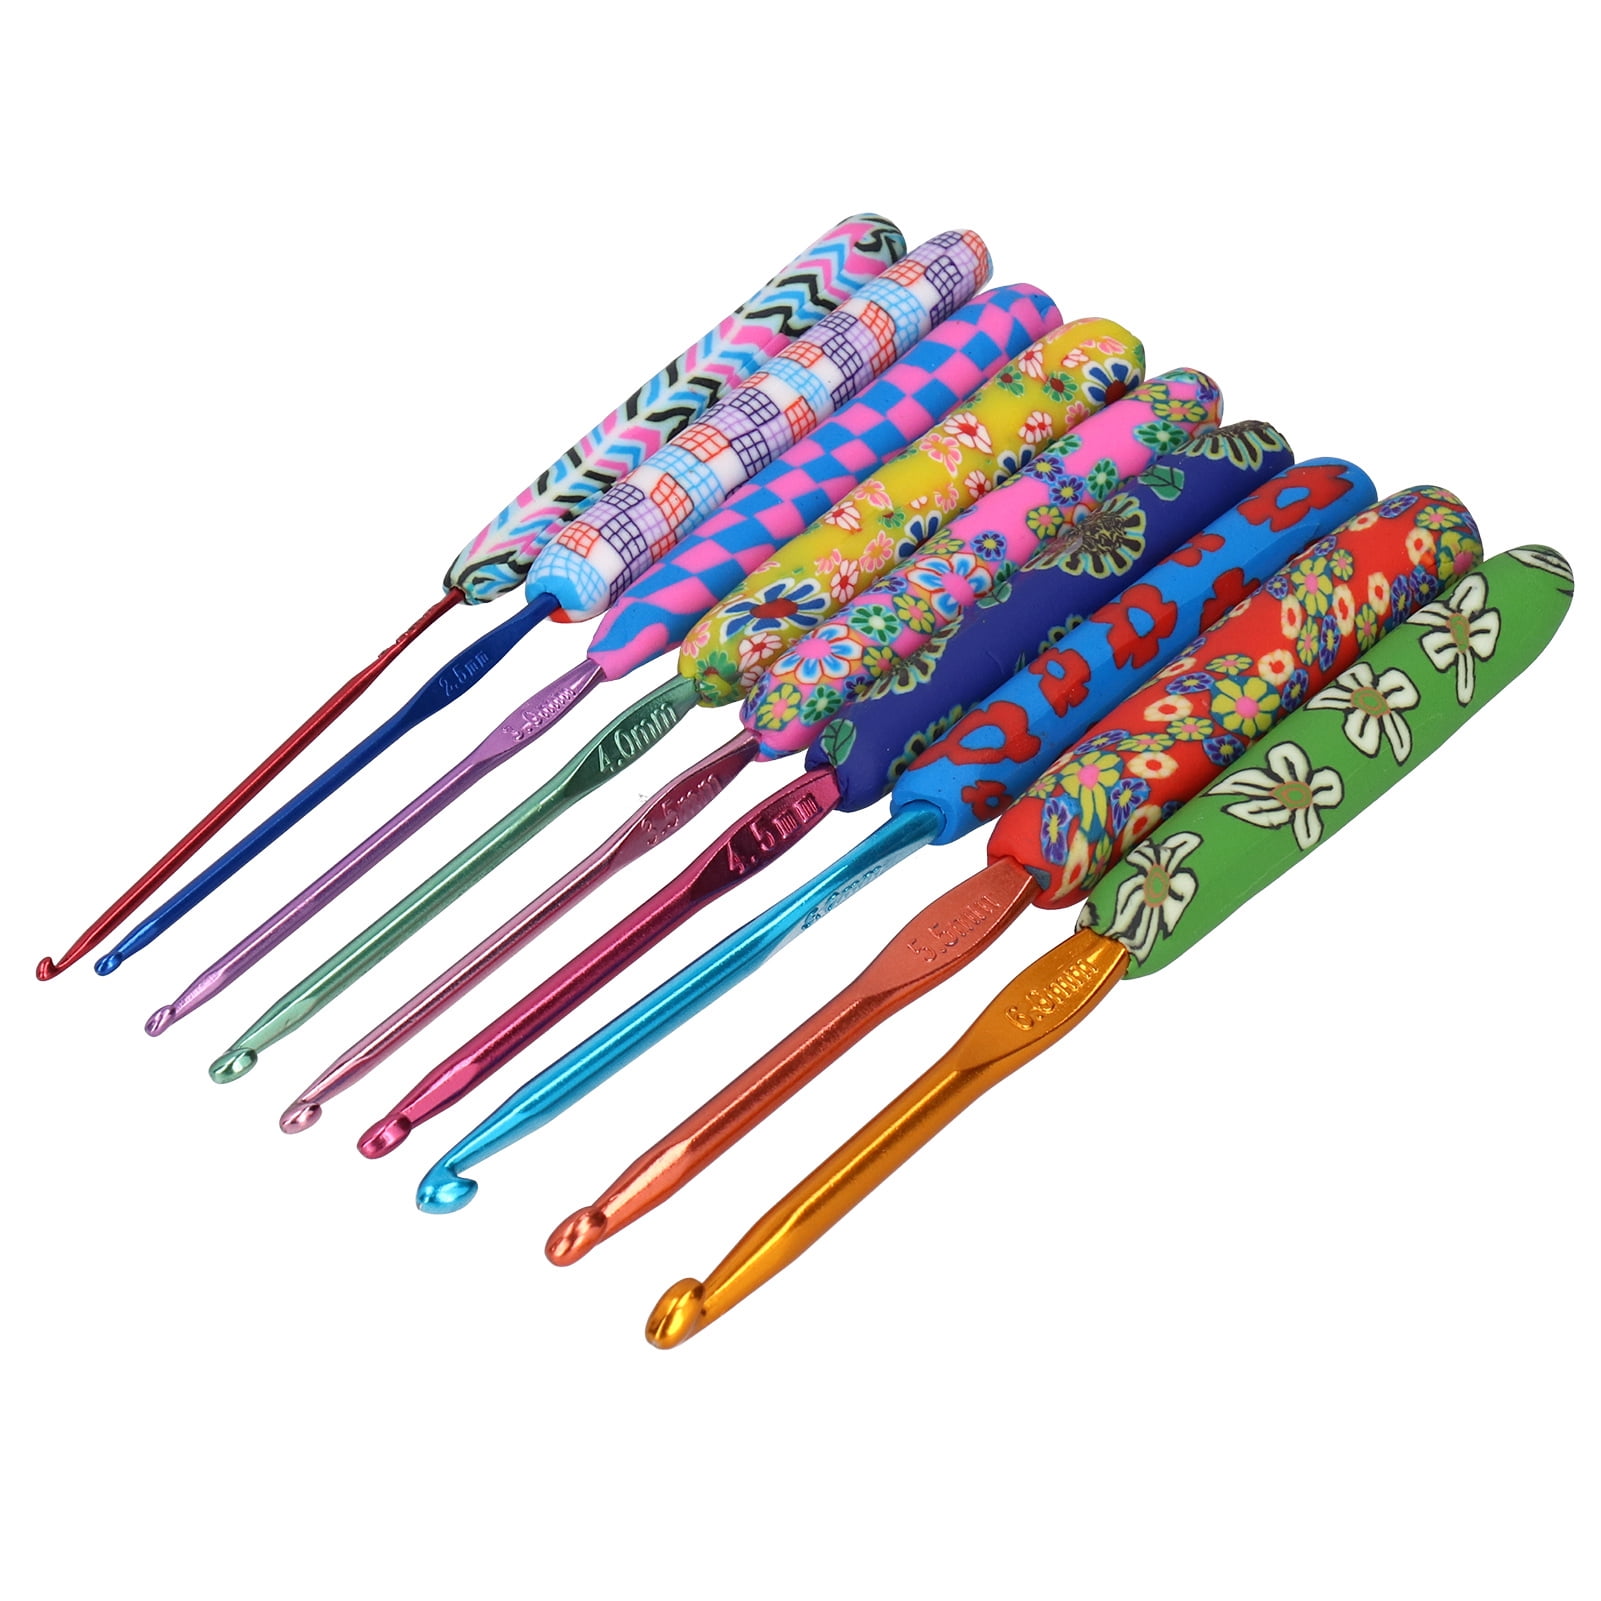 Beautiful Crochet Hook Sets for Every Budget - DIY Project and Articles -  OHCHIVES